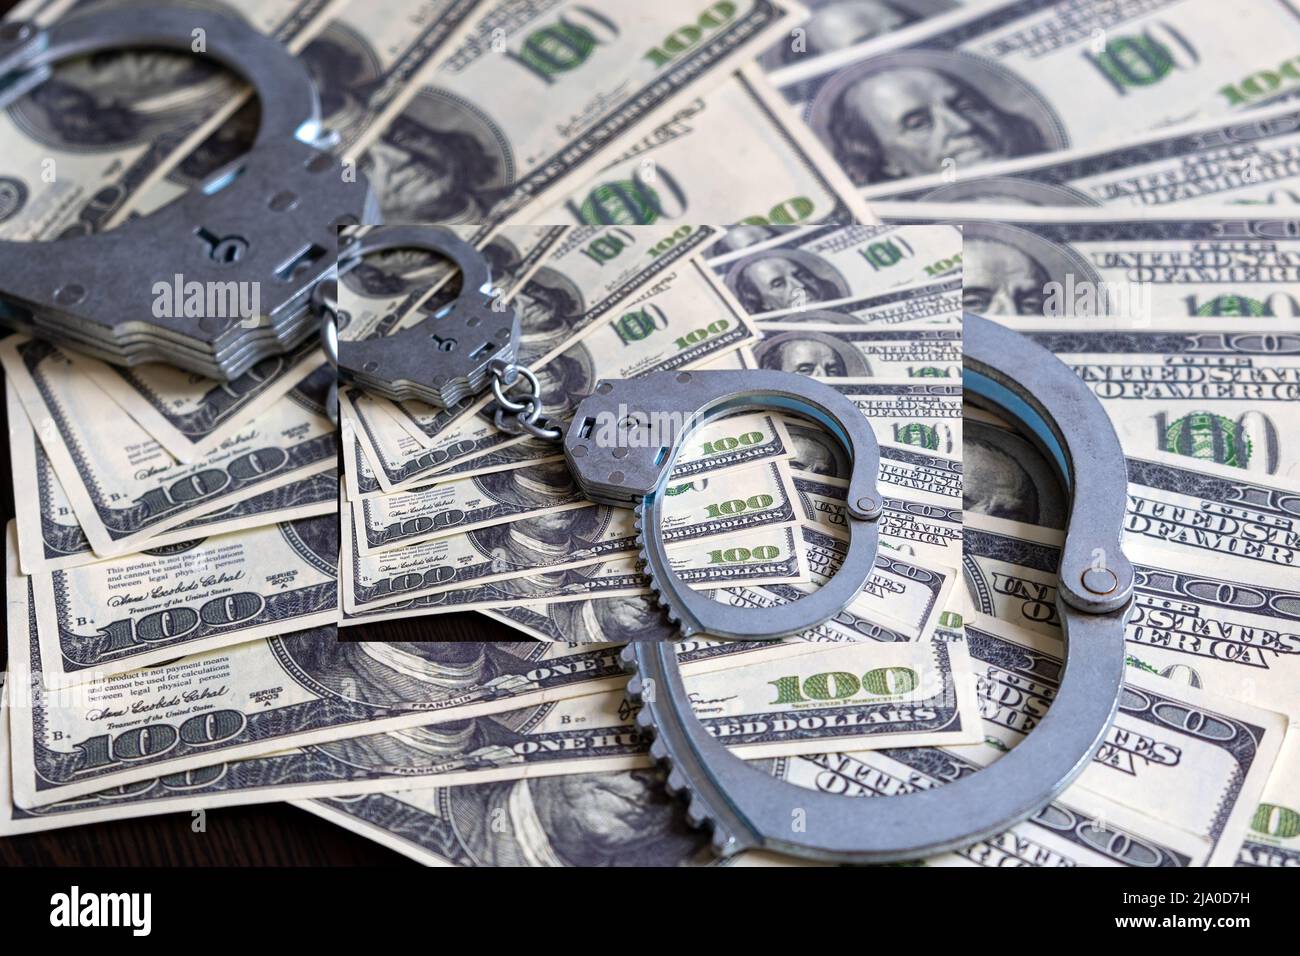 Cash in US Dollars, Real Handcuffs. The Concept of Arrest, Corruption, Bail, Crime, Bribery or Fraud Stock Photo